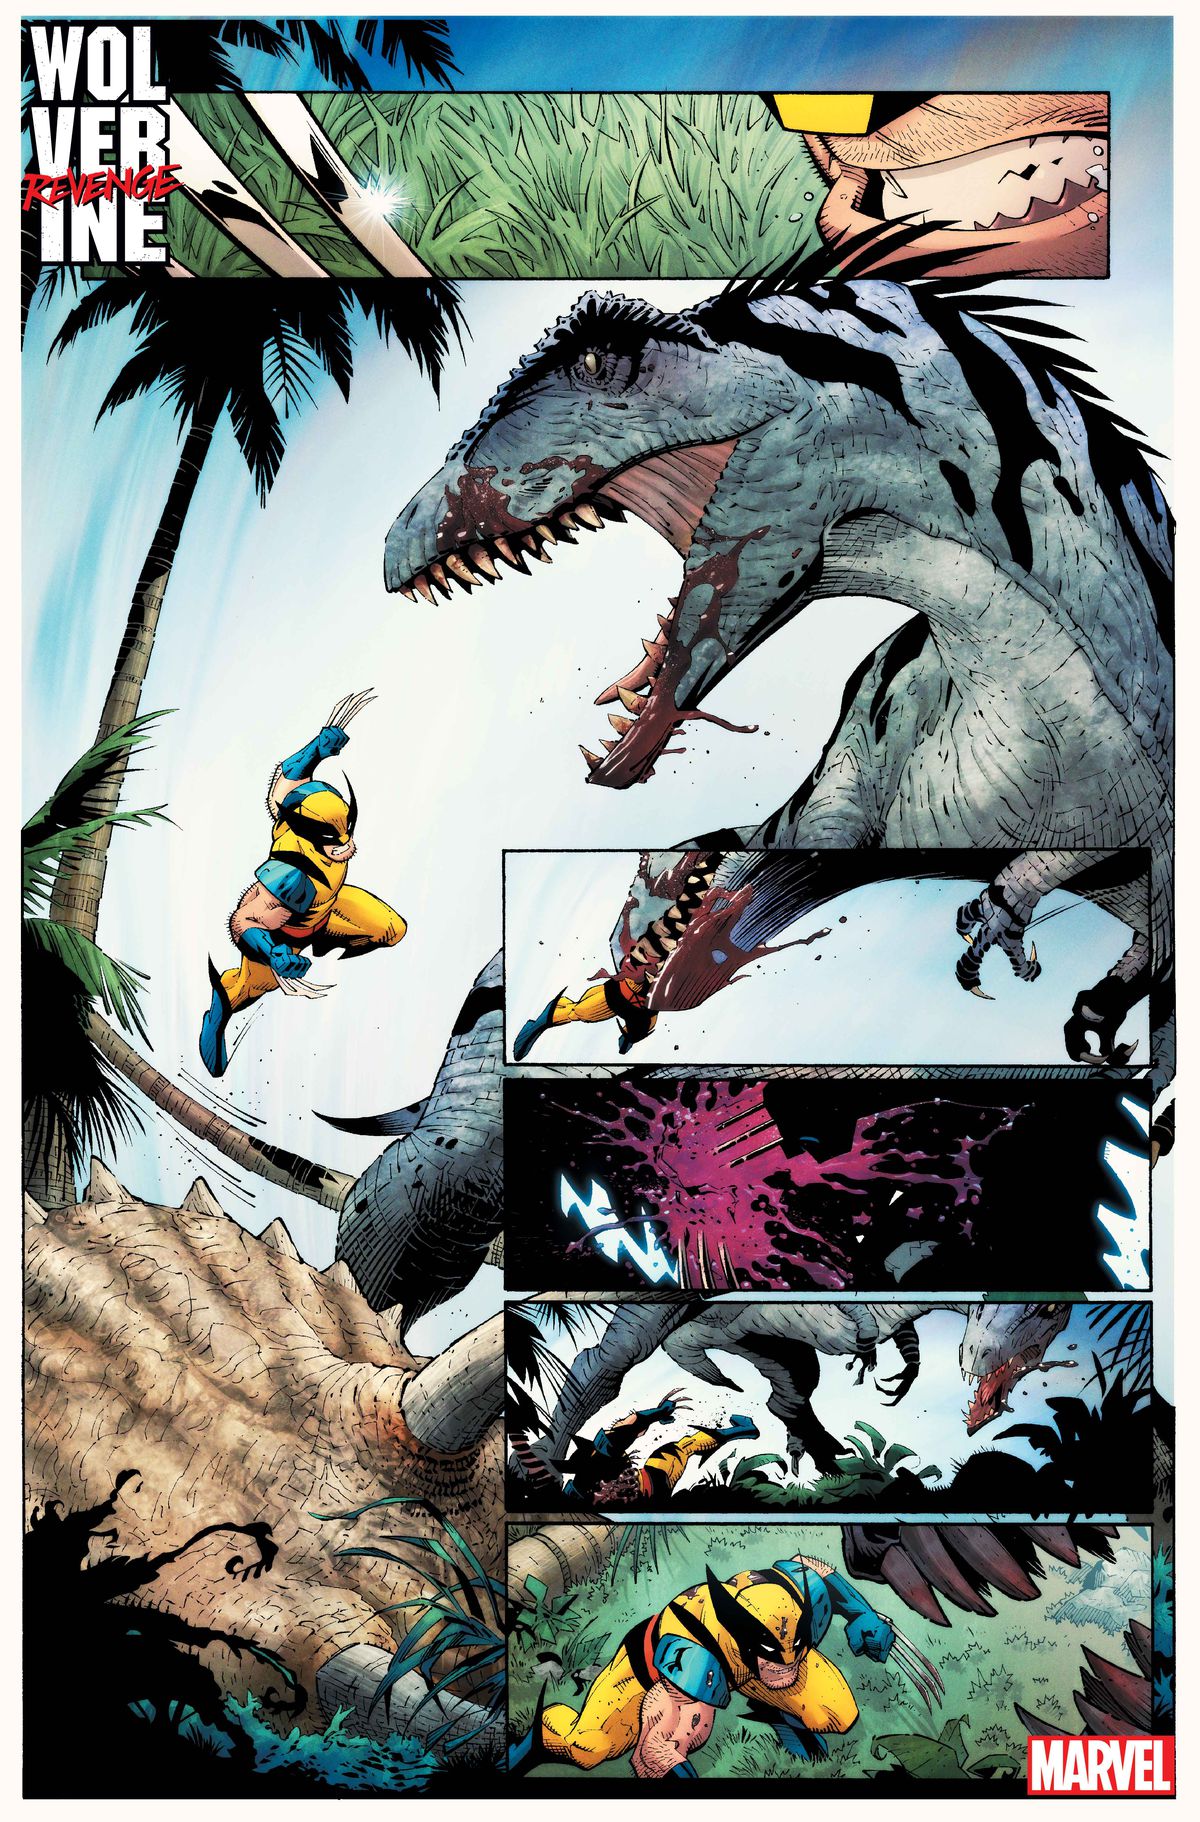 Wolverine unsheathes his claws and leaps at a therapod-type dinosaur standing over its fresh triceratops kill. It snaps Wolverine up in its jaws, but then spits him out when Wolverine slashes it with his claws, in Wolverine: Revenge #1.